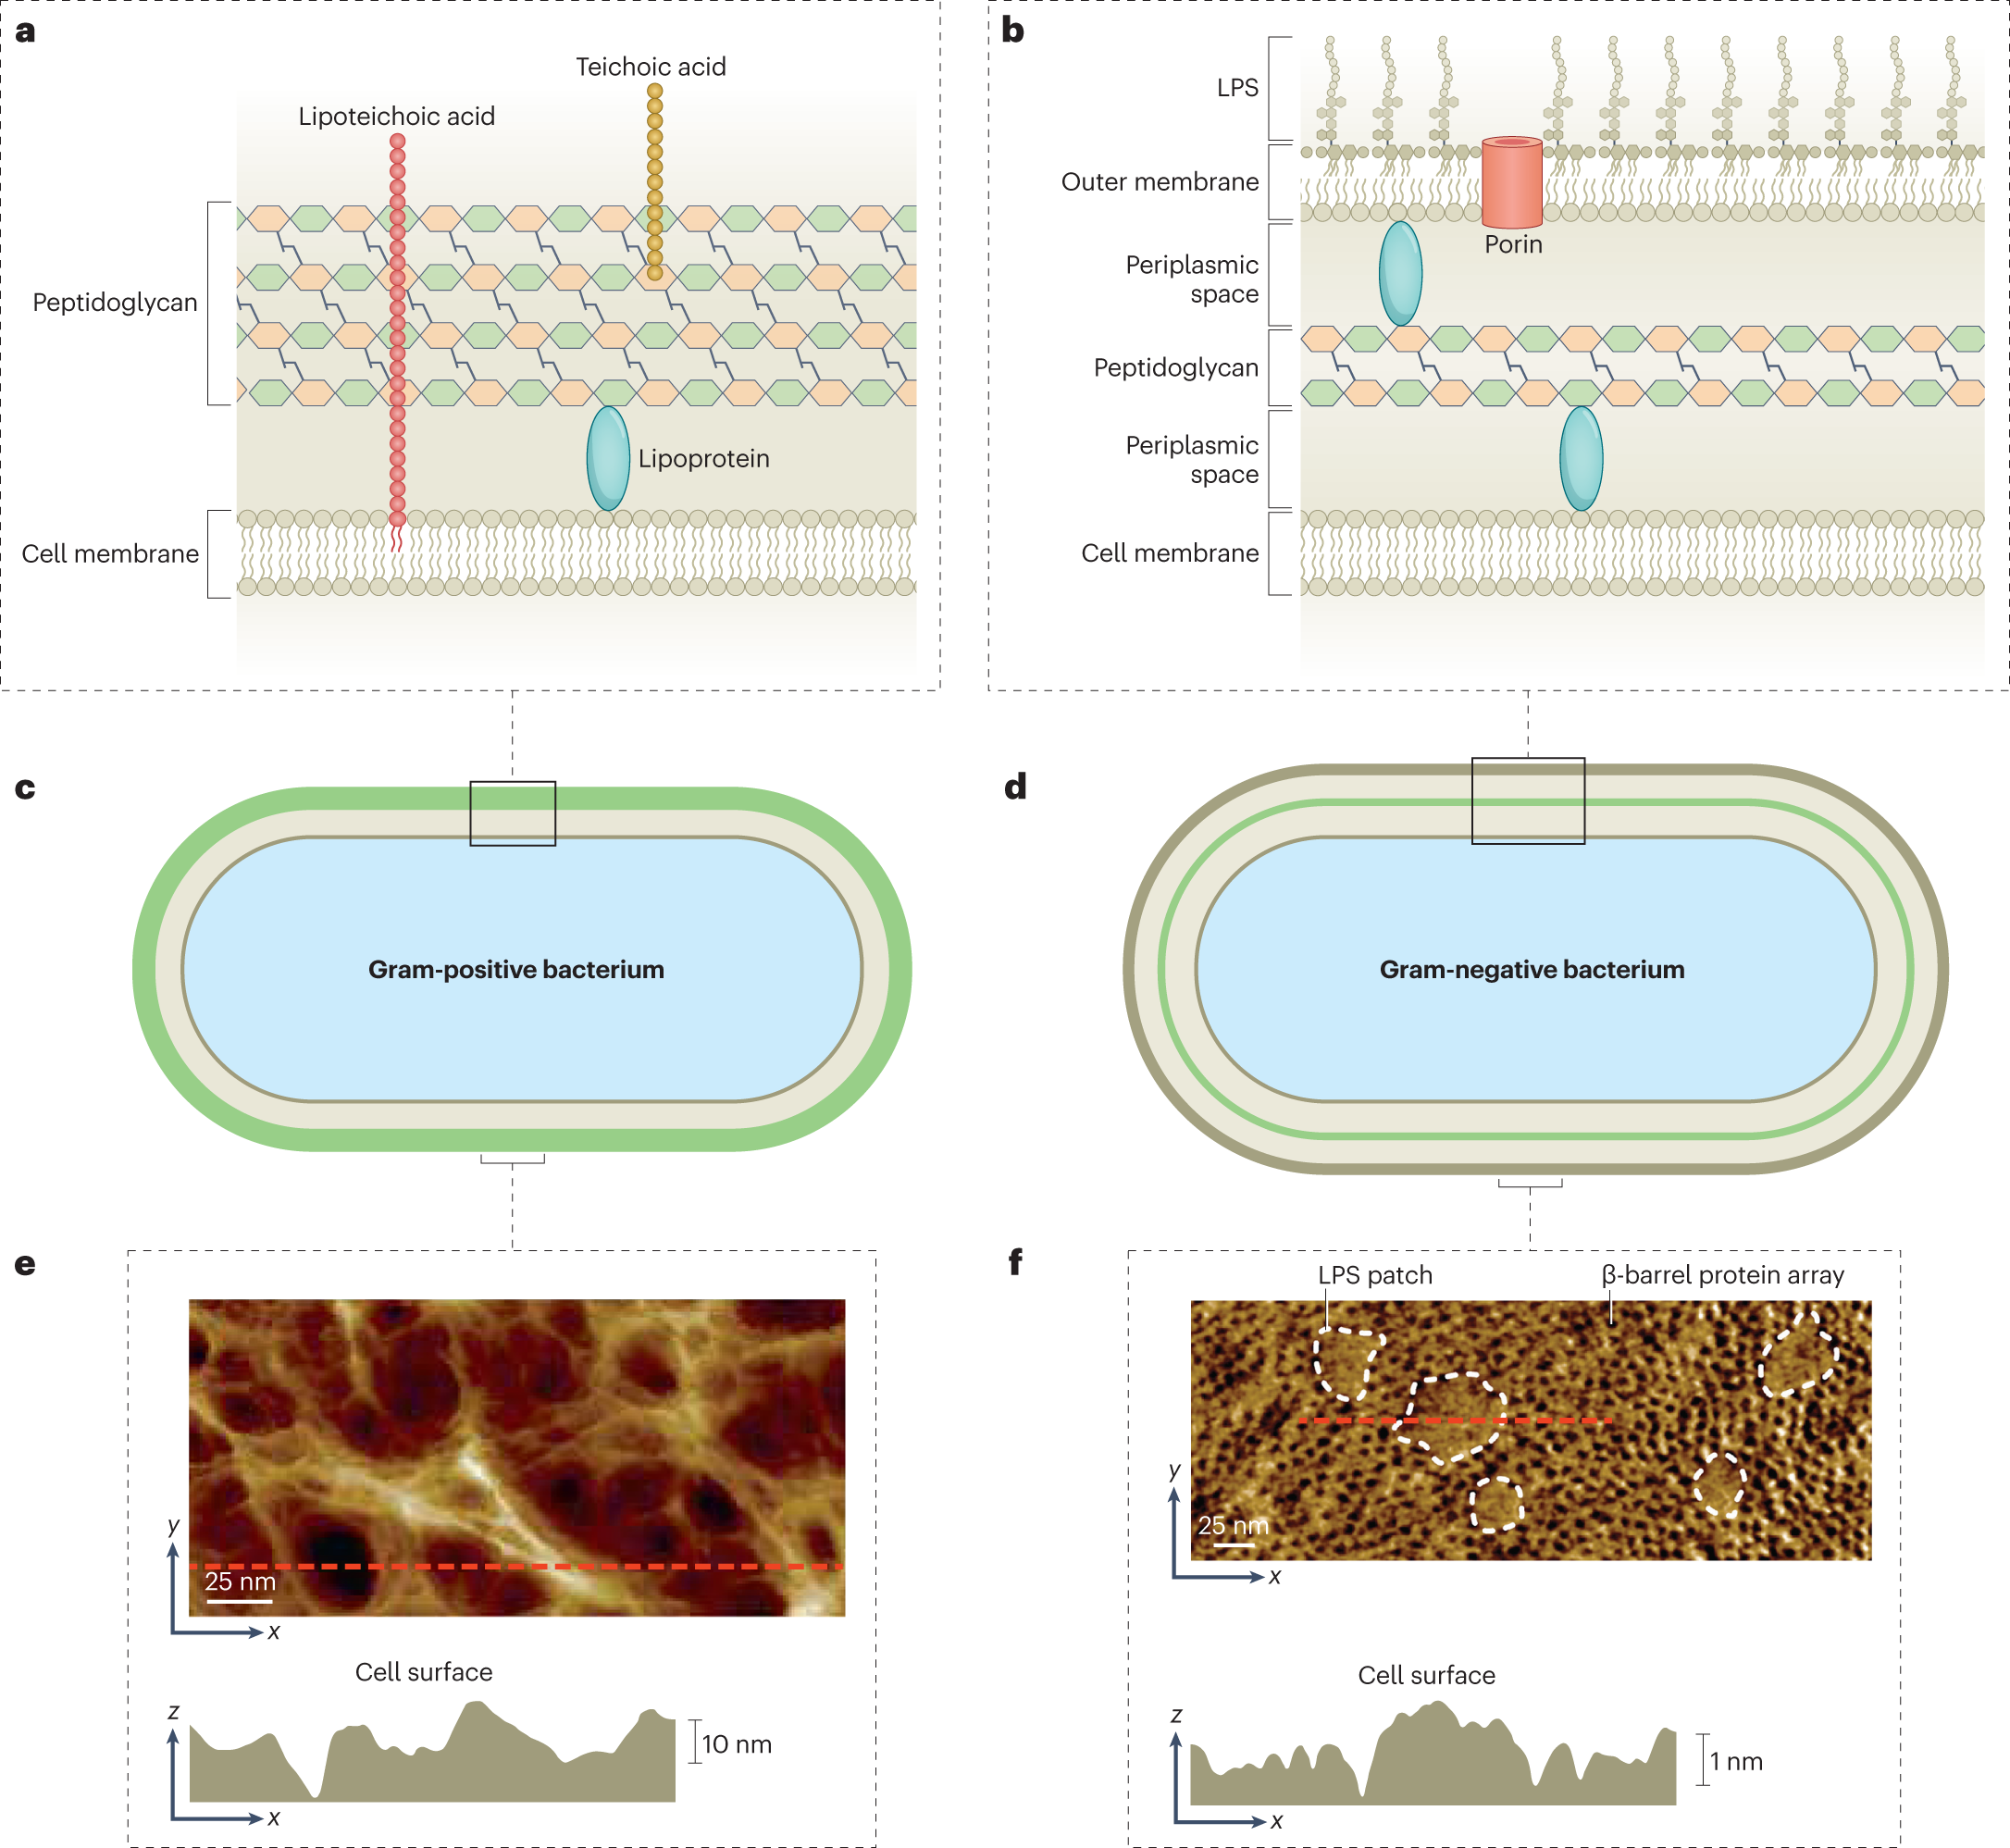 Spatiotemporal mapping of bacterial membrane potential responses